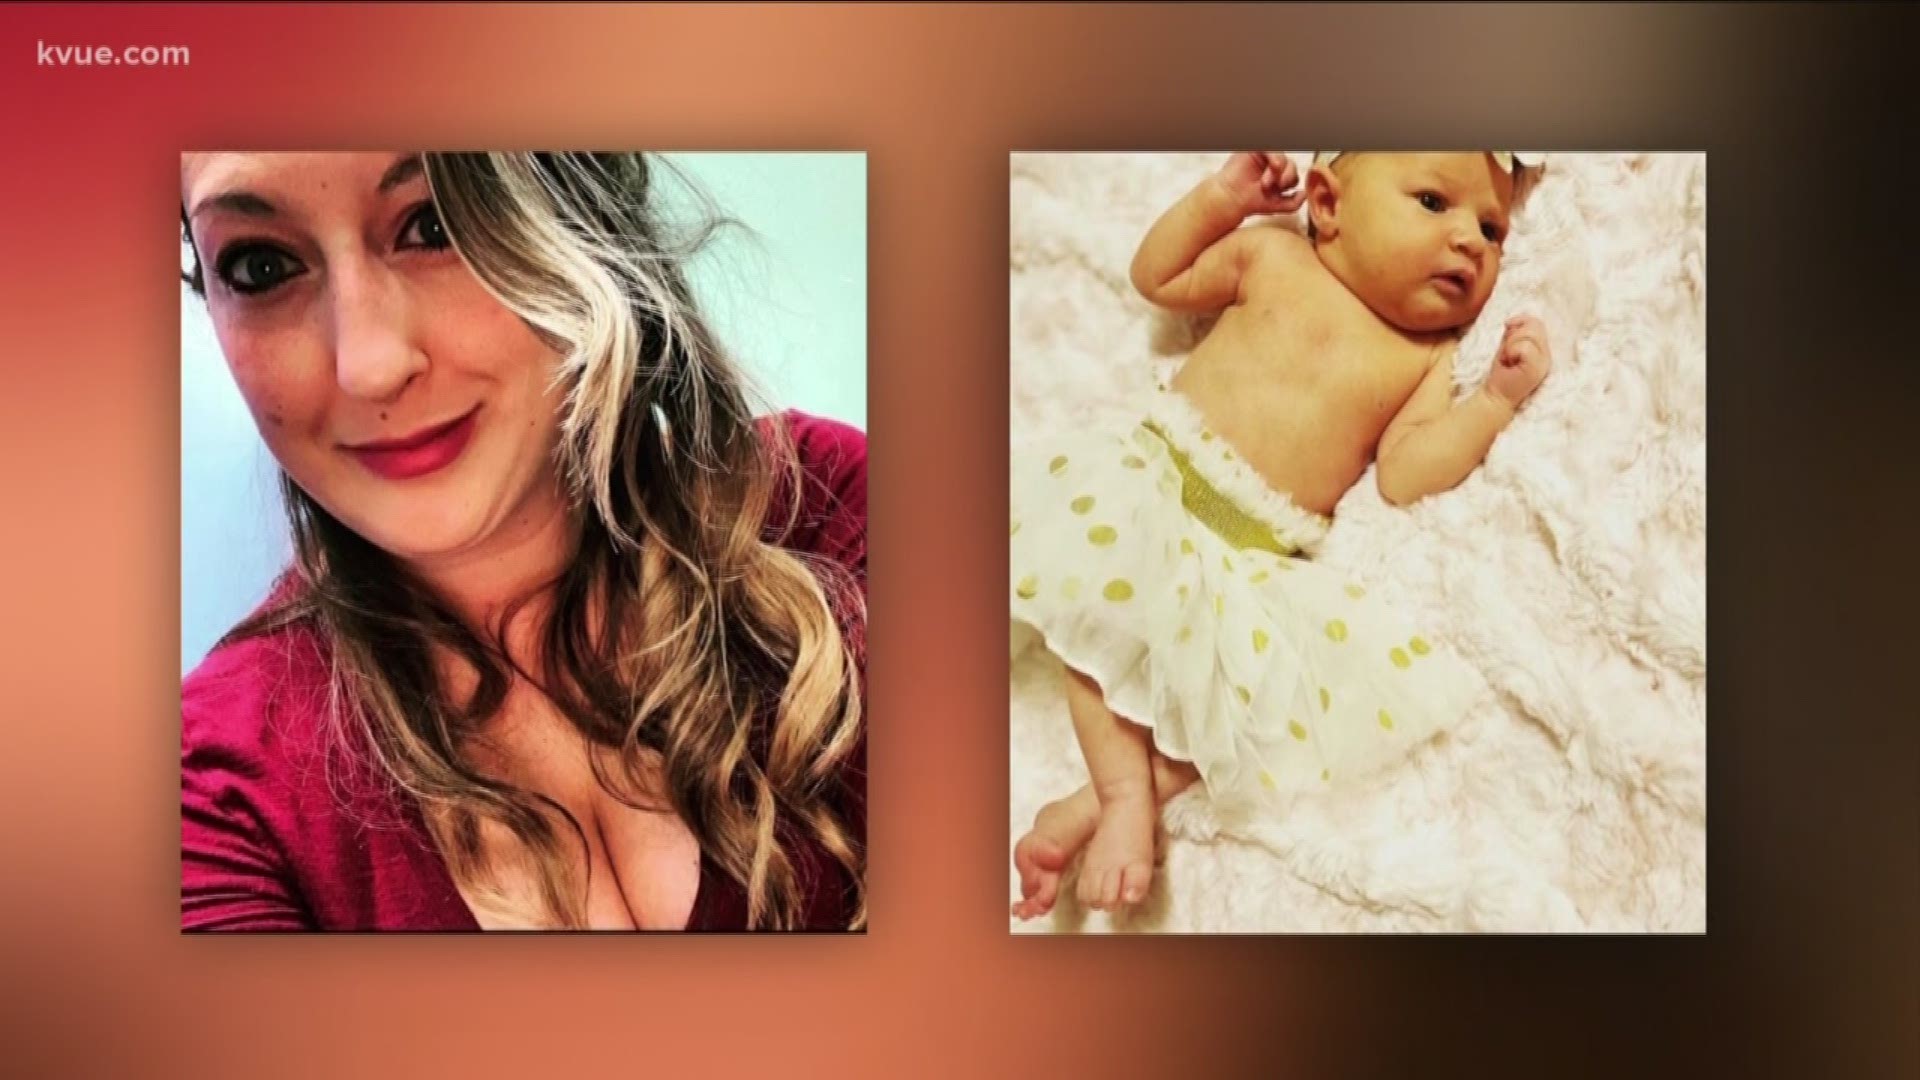 Federal agents from a special child abduction response team are now in Austin, joining in the urgent search for Heidi Broussard and her weeks-old baby.